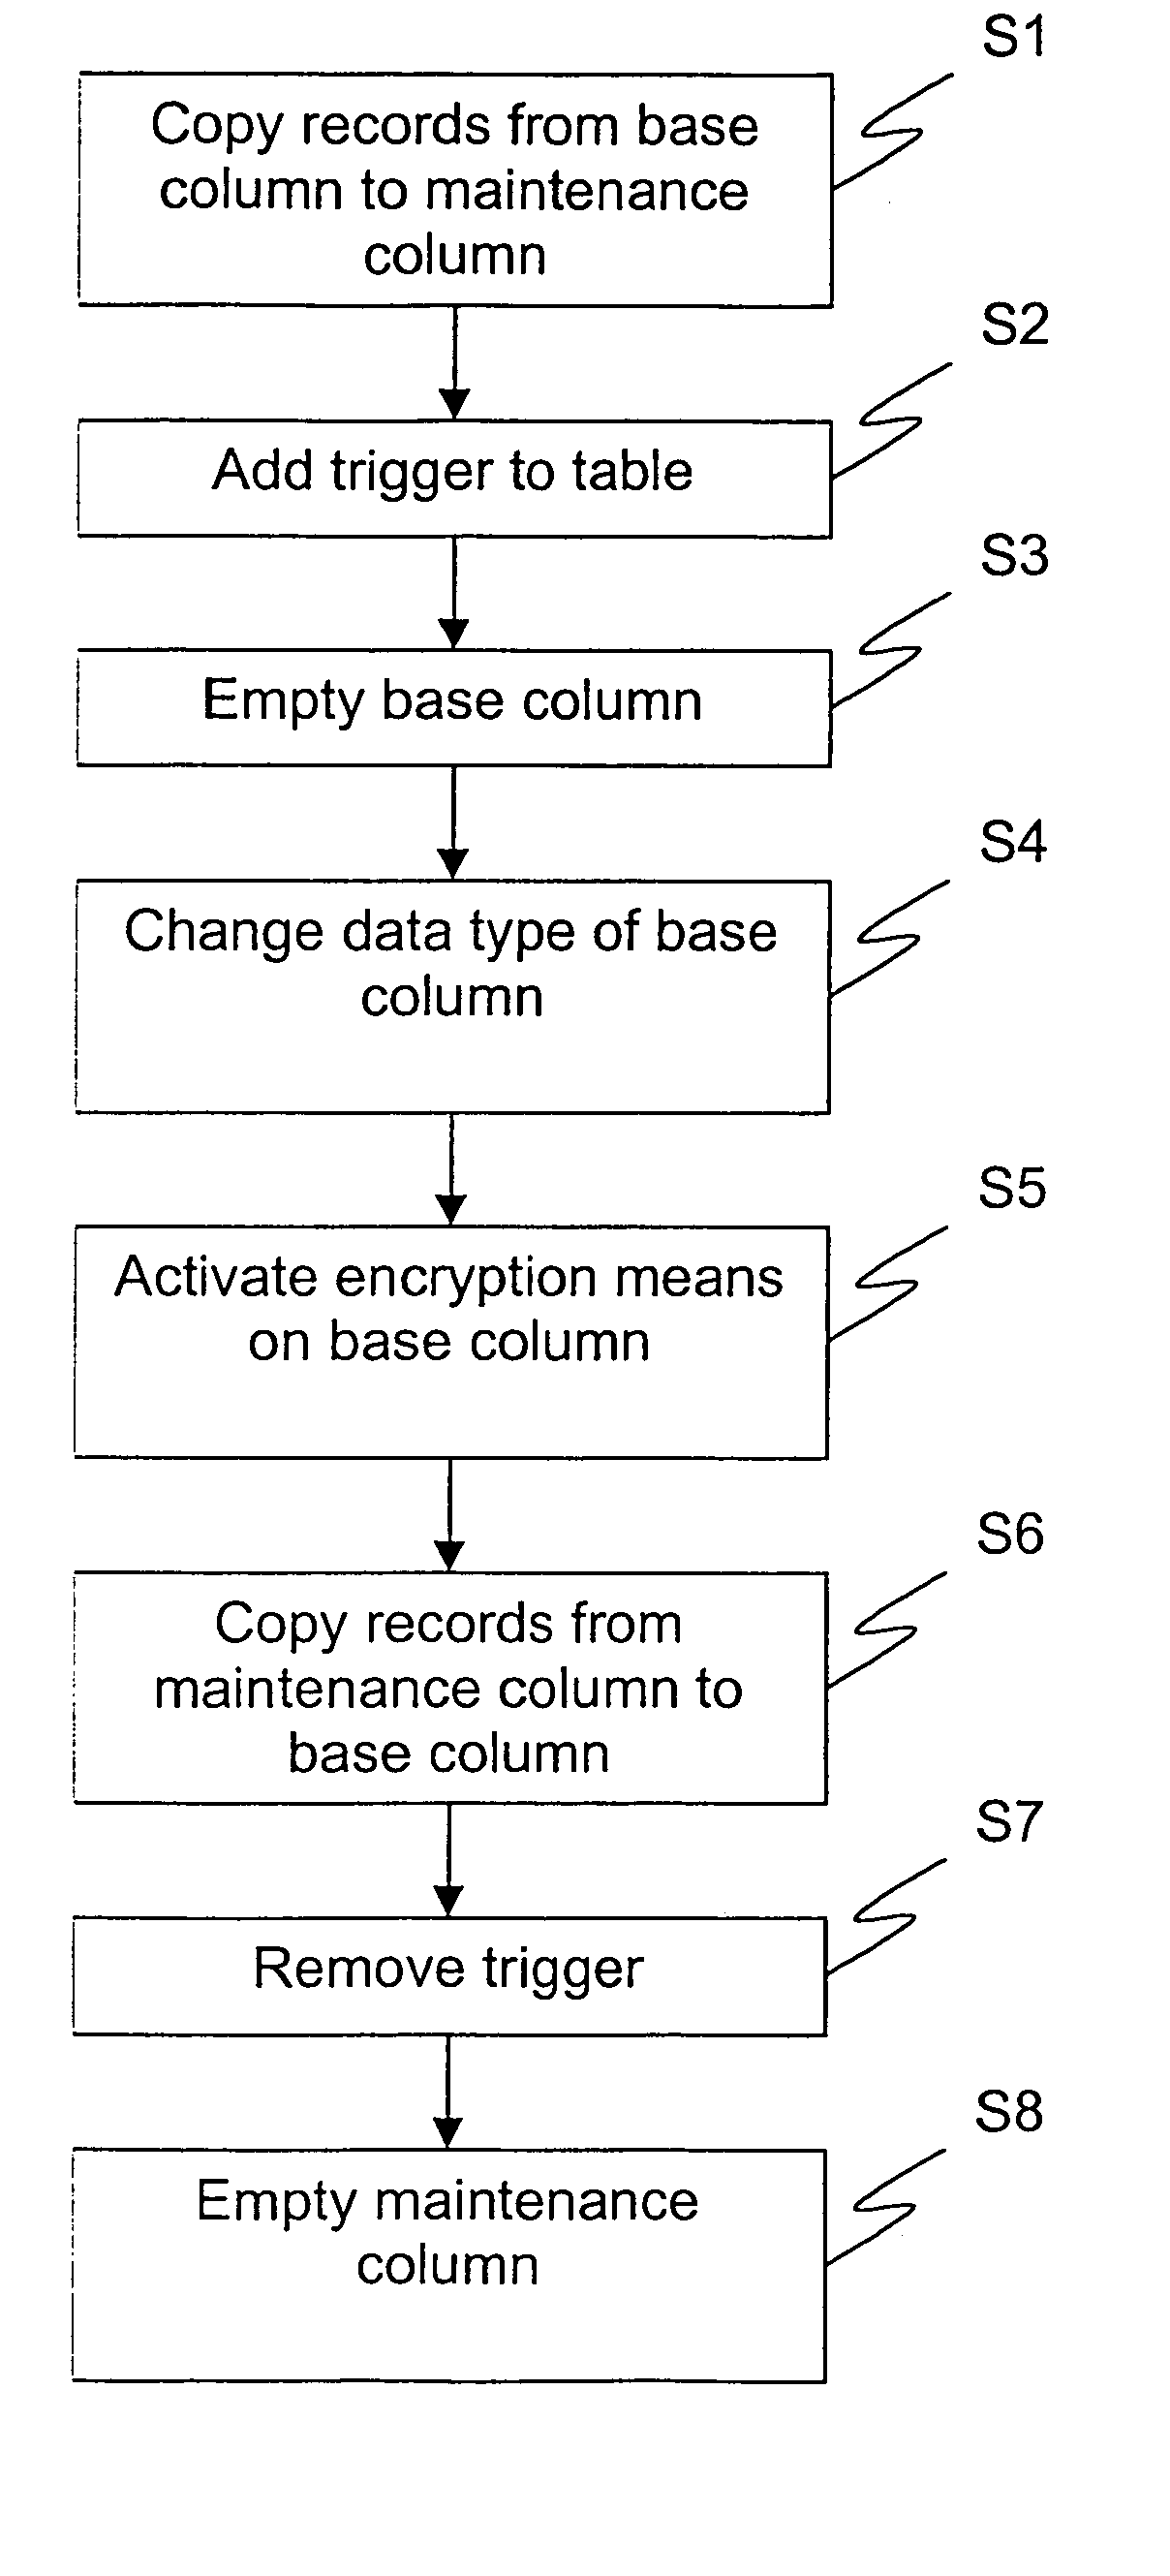 Method for altering encryption status in a relational database in a continuous process